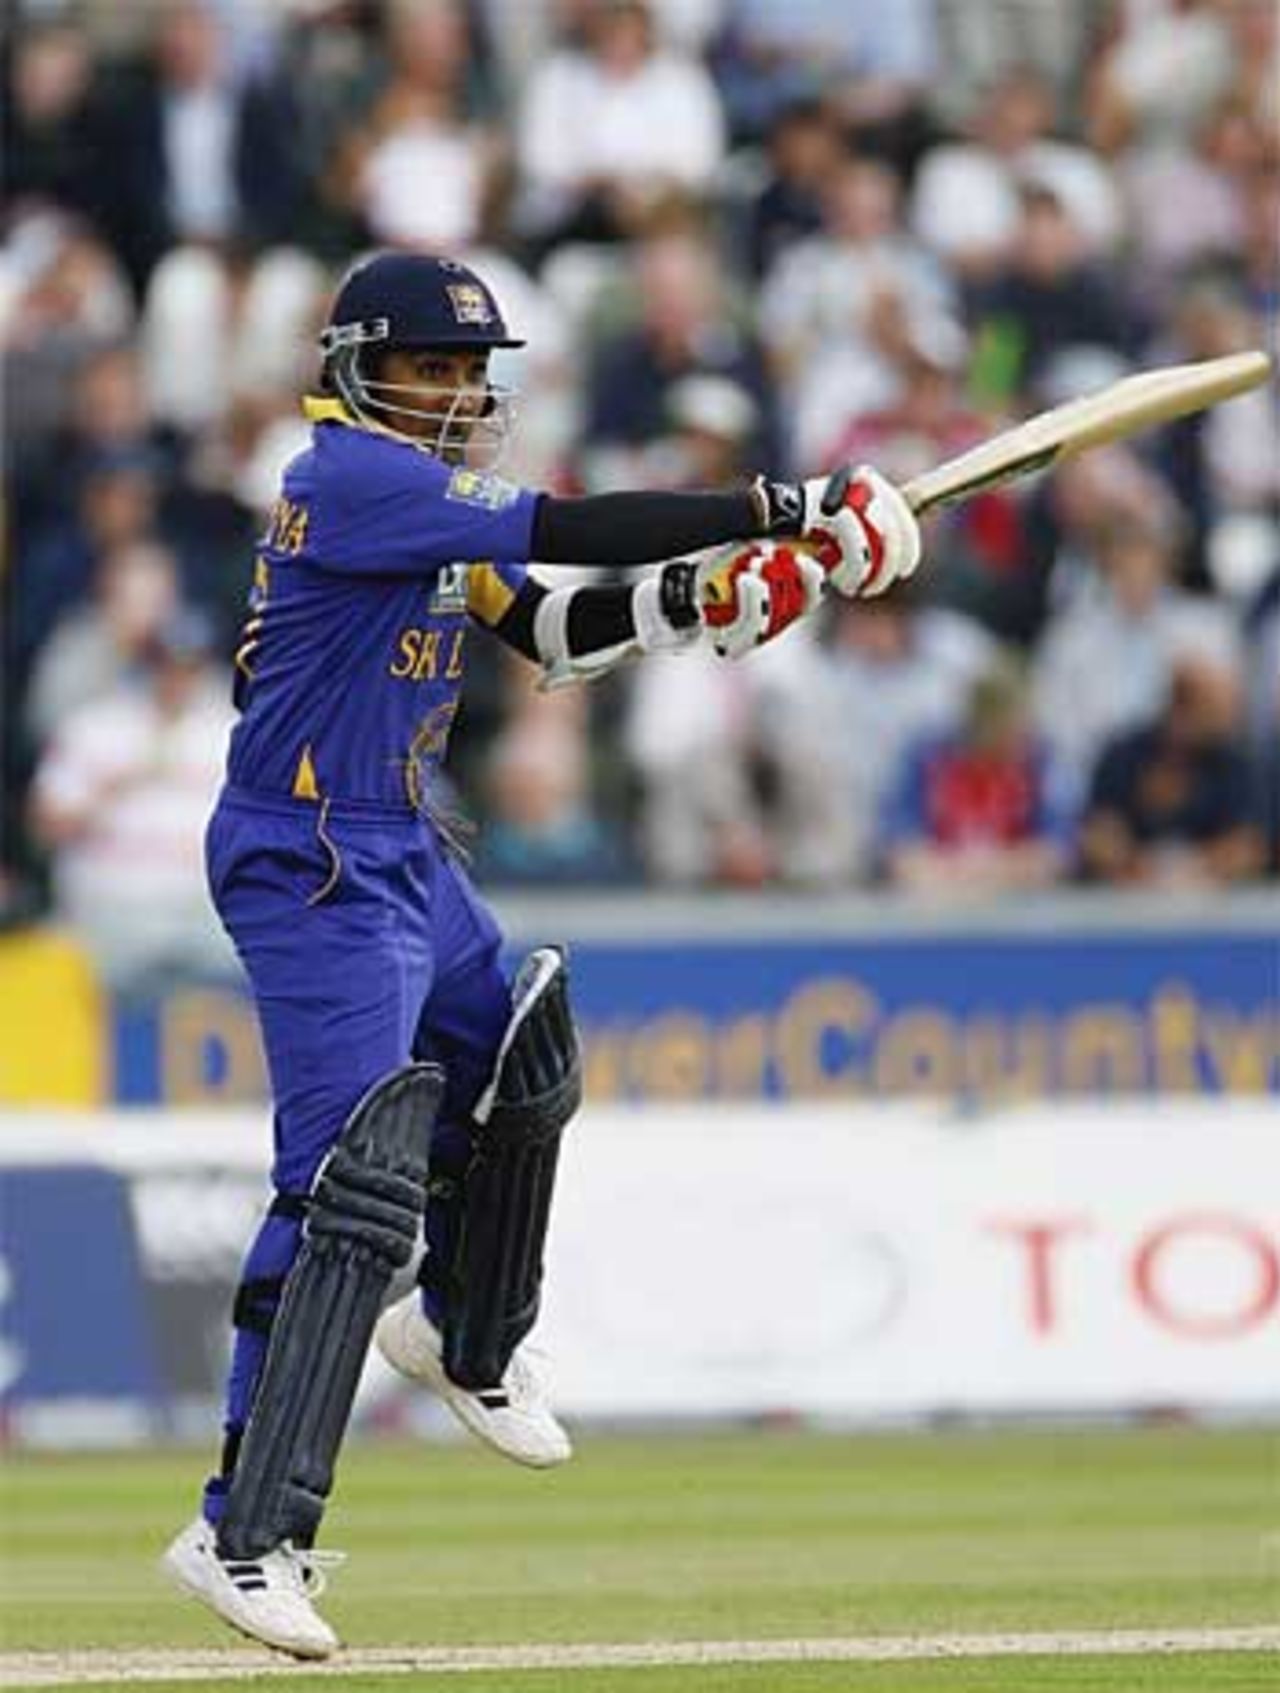 Mahela Jayawardene scorches one through cover on his way to a firecracking hundred, England v Sri Lanka, Chester-le-Street, June 24, 2006